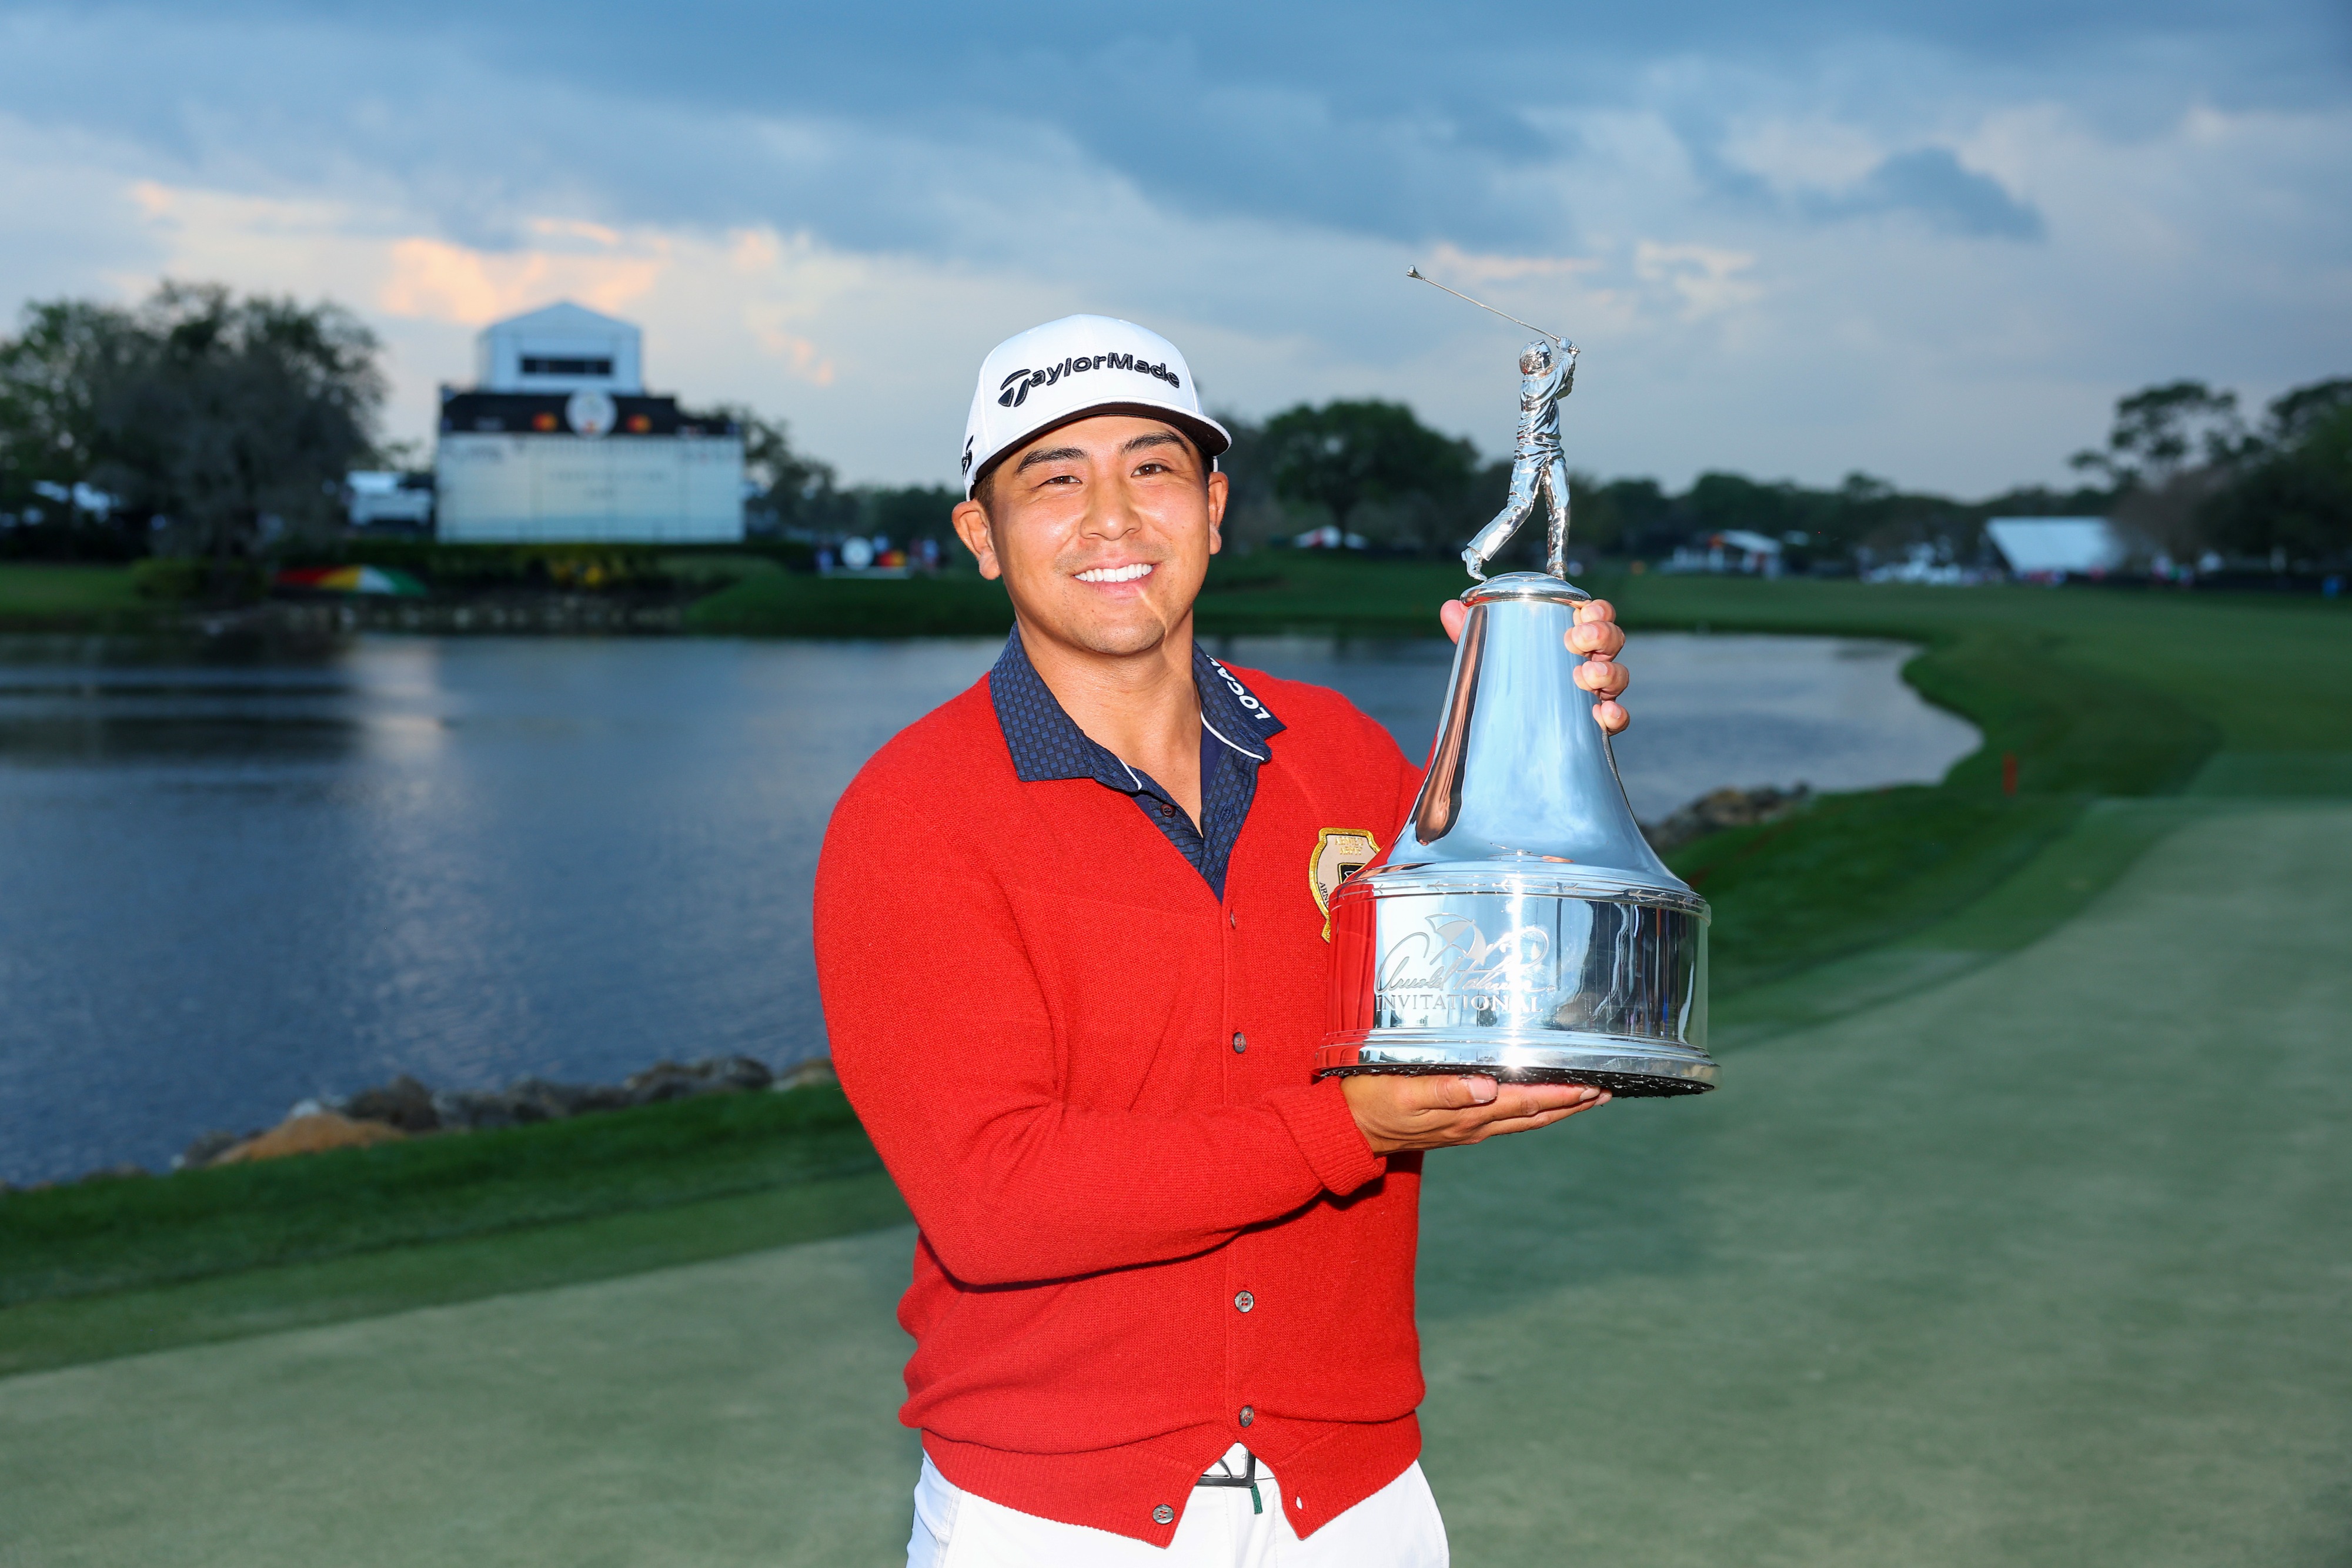 Kitayama Holds On, Secures First PGA TOUR Win At Arnold Palmer Invitational Presented By Mastercard